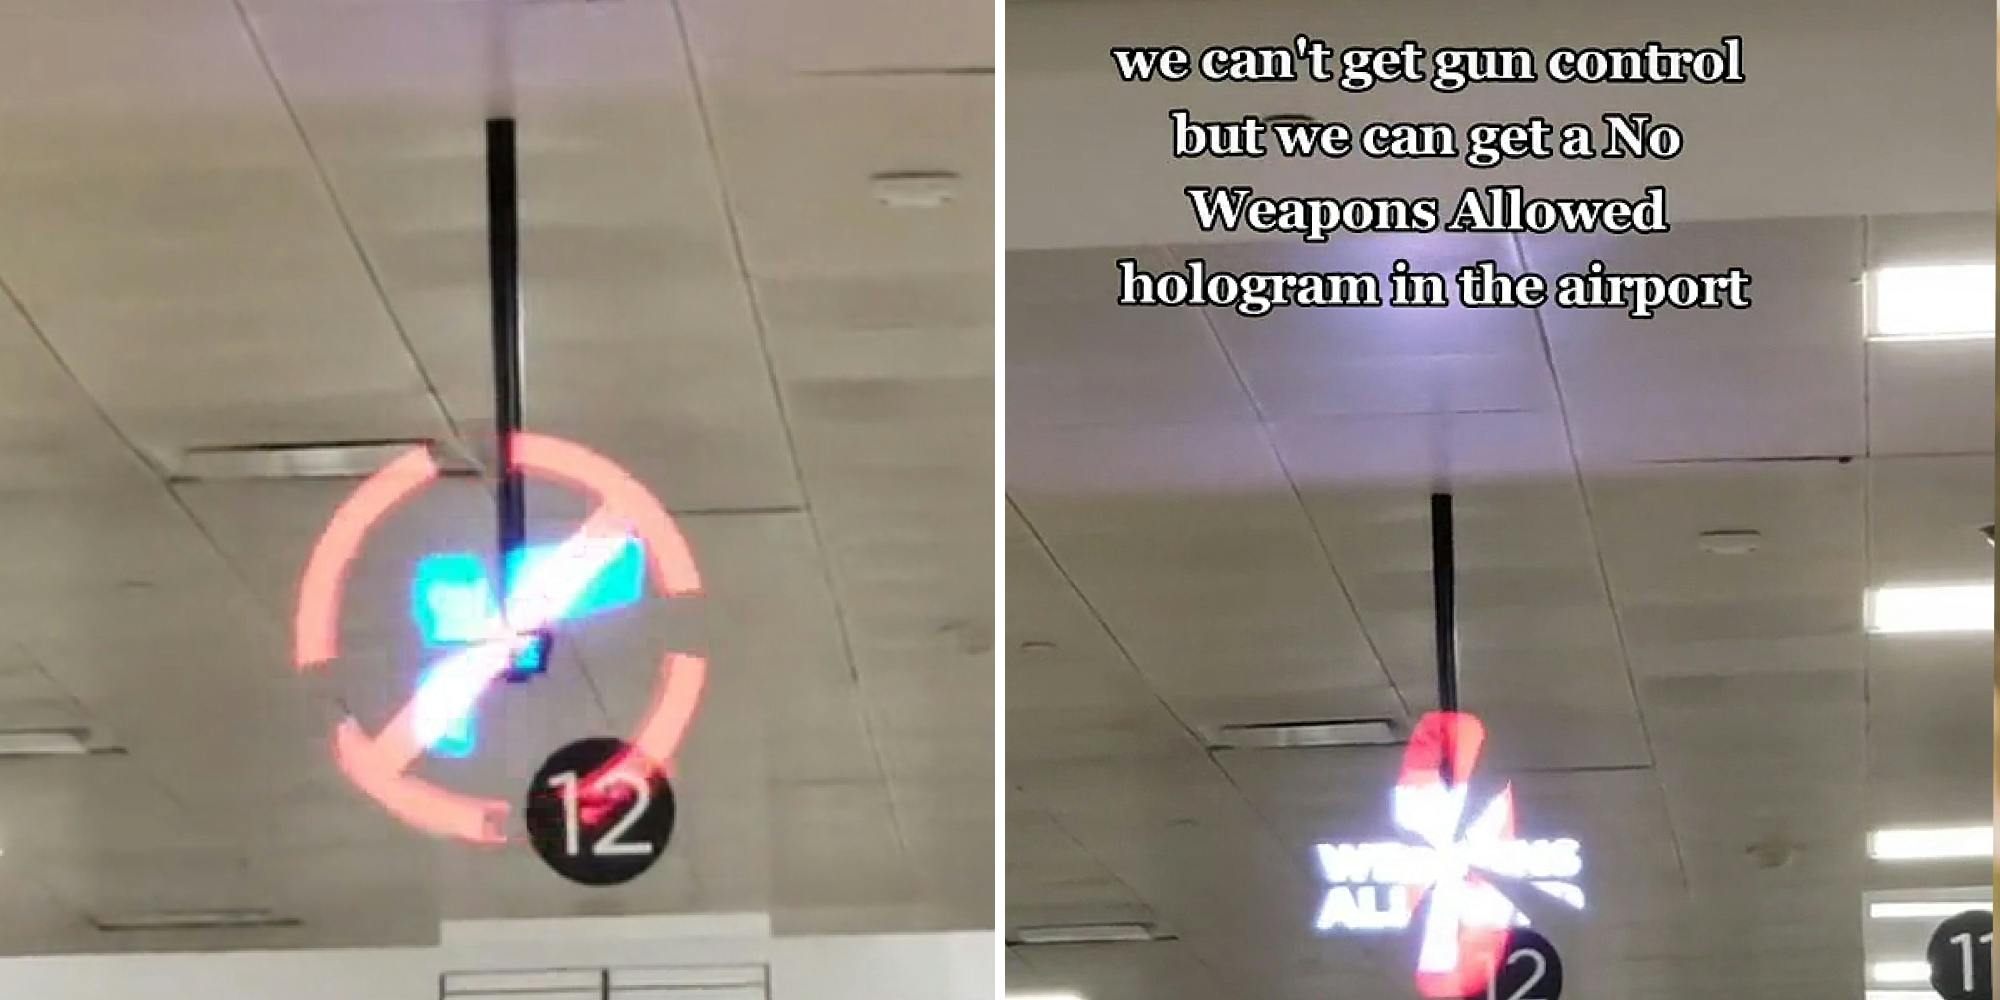 airport sign with gun shape and red circle with cross attached to ceiling (l) airport sign "NO WEAPONS ALLOWED" attached to ceiling caption "we can't get gun control but we can get a No Weapons Allowed hologram in the airport" (r)